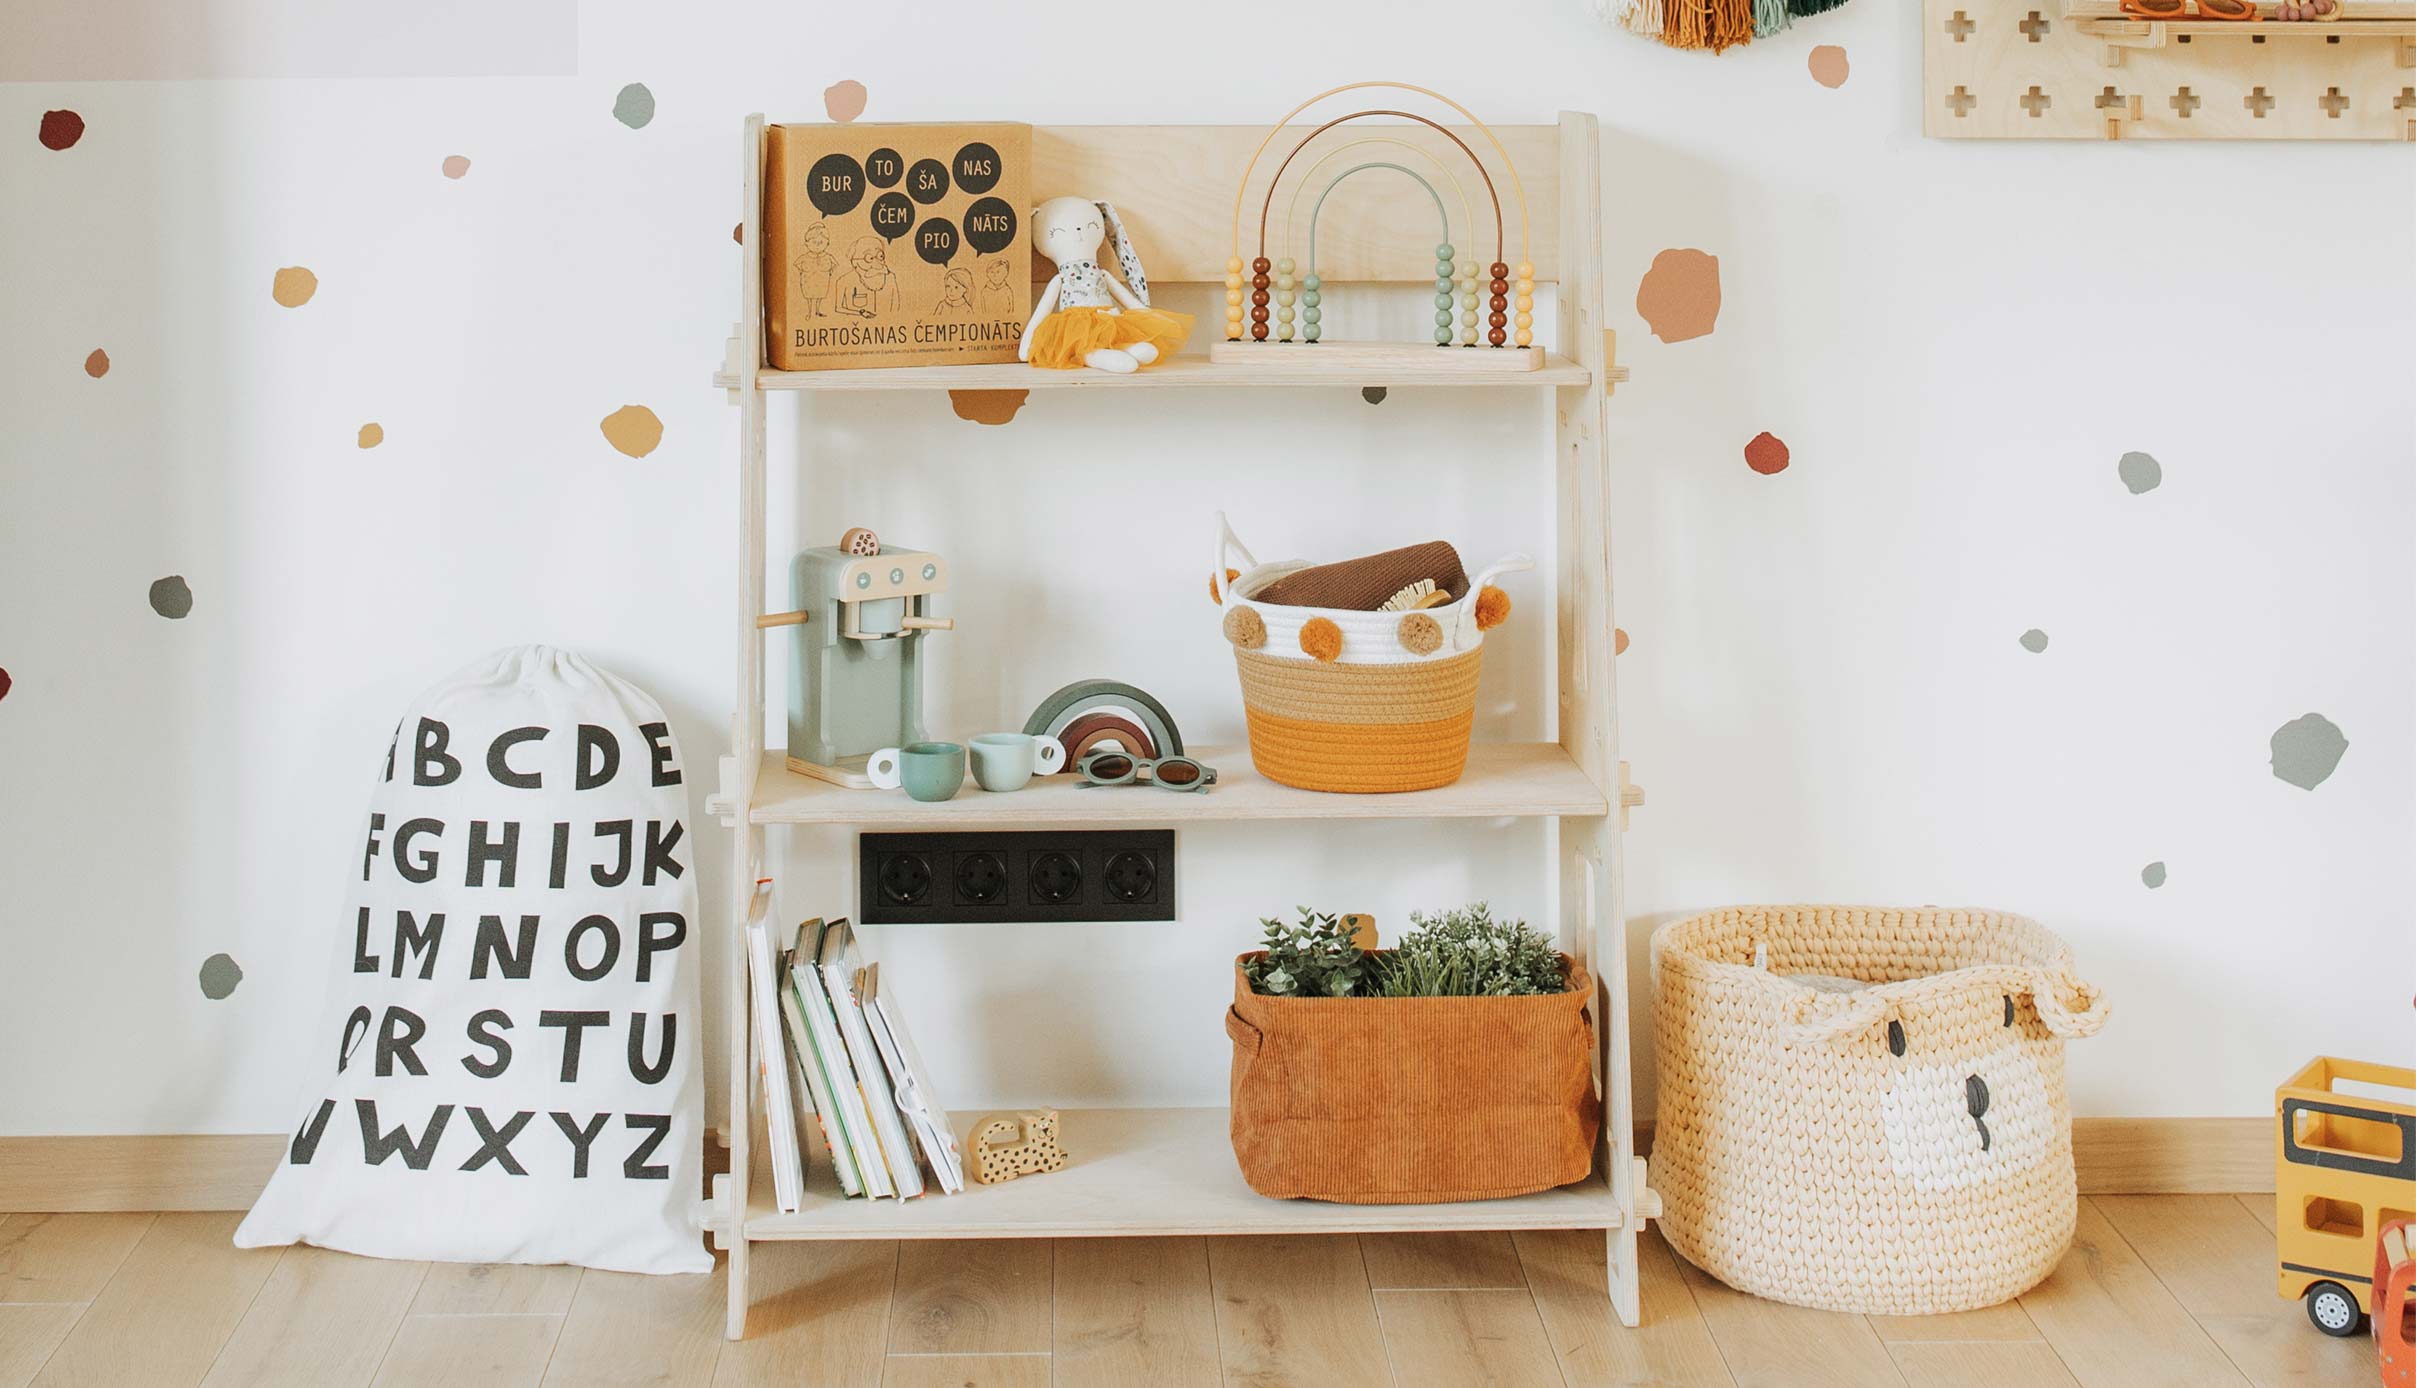 A child's room with a book shelf, toys and a polka dot wall.